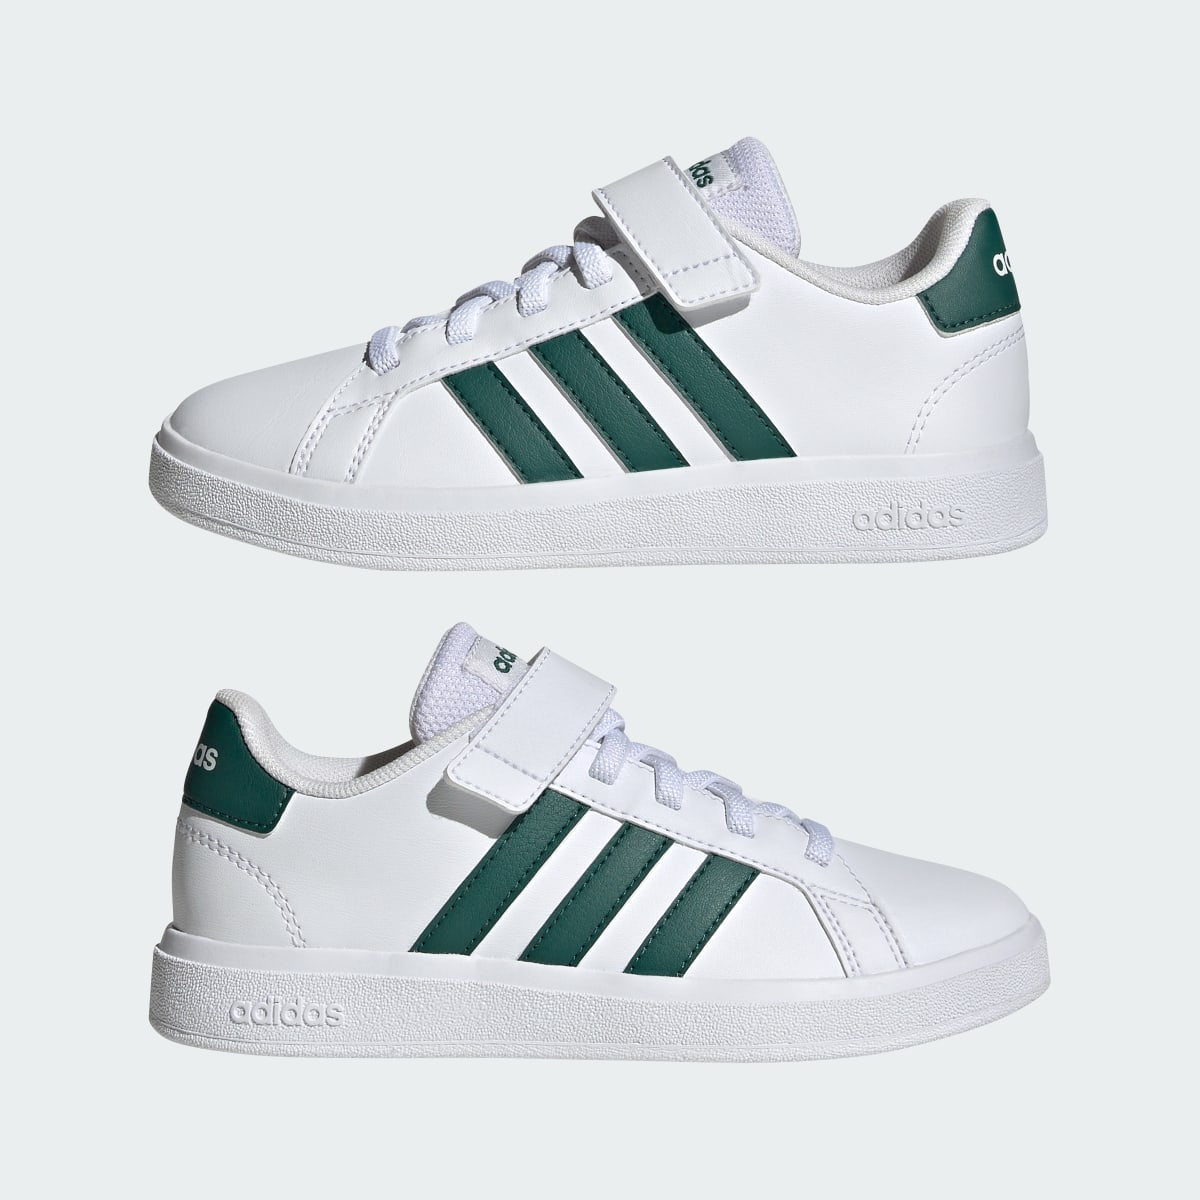 Adidas Grand Court Court Elastic Lace and Top Strap Schuh. 8